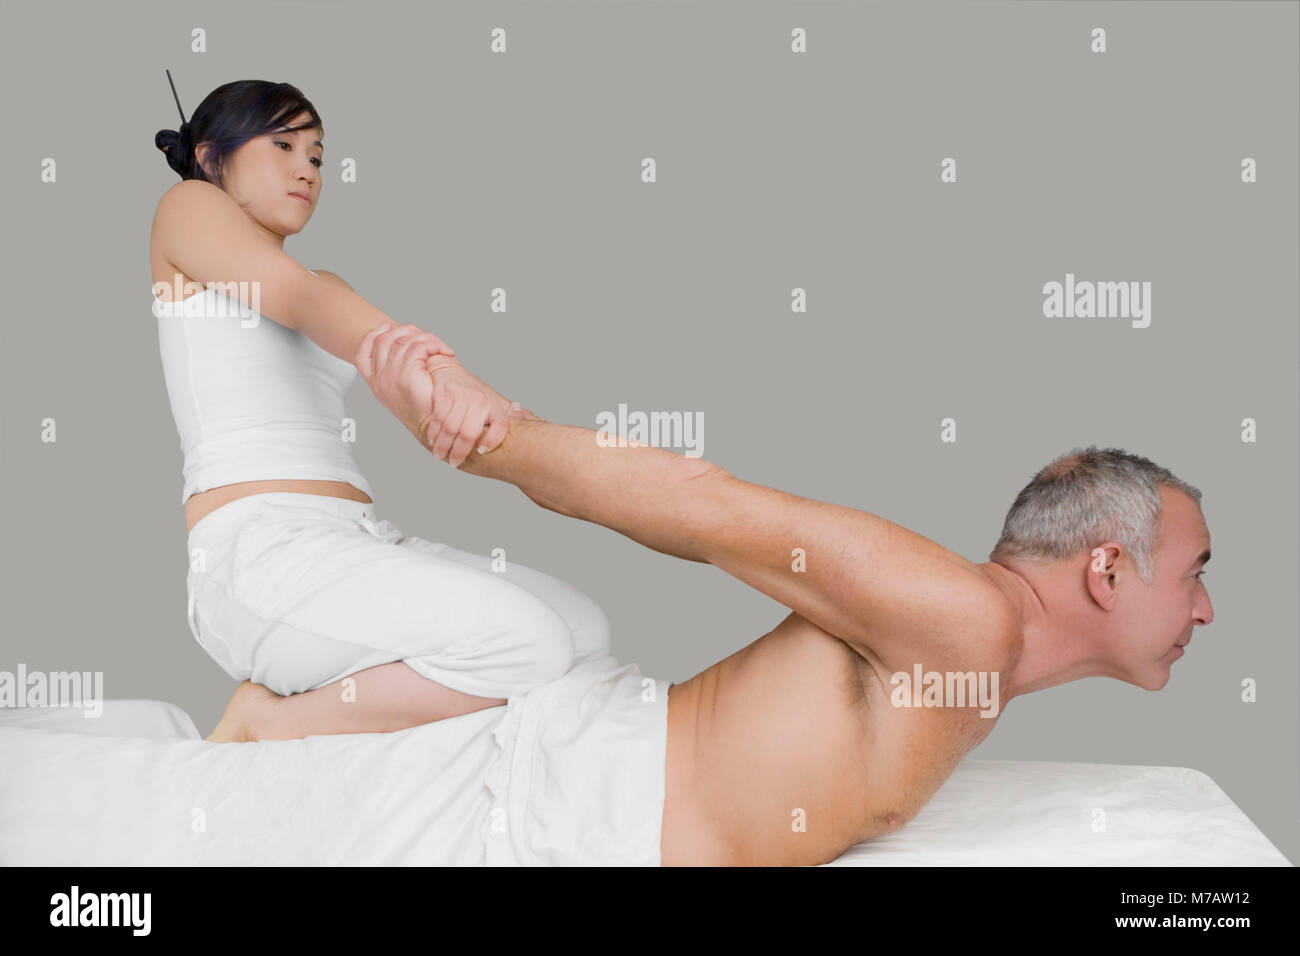 Side profile of a senior man receiving a back massage from a massage therapist Stock Photo